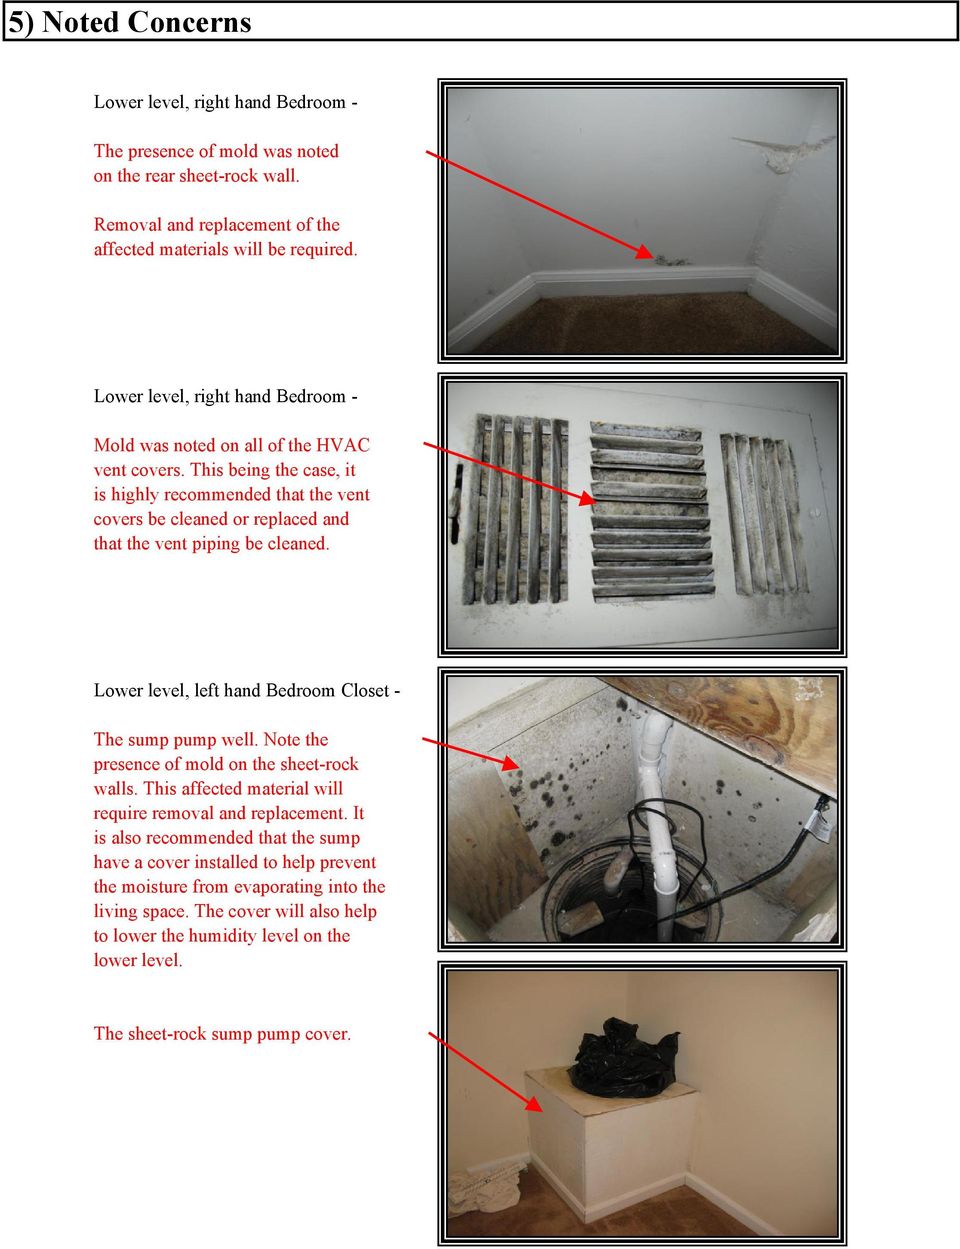 This being the case, it is highly recommended that the vent covers be cleaned or replaced and that the vent piping be cleaned. Lower level, left hand Bedroom Closet - The sump pump well.